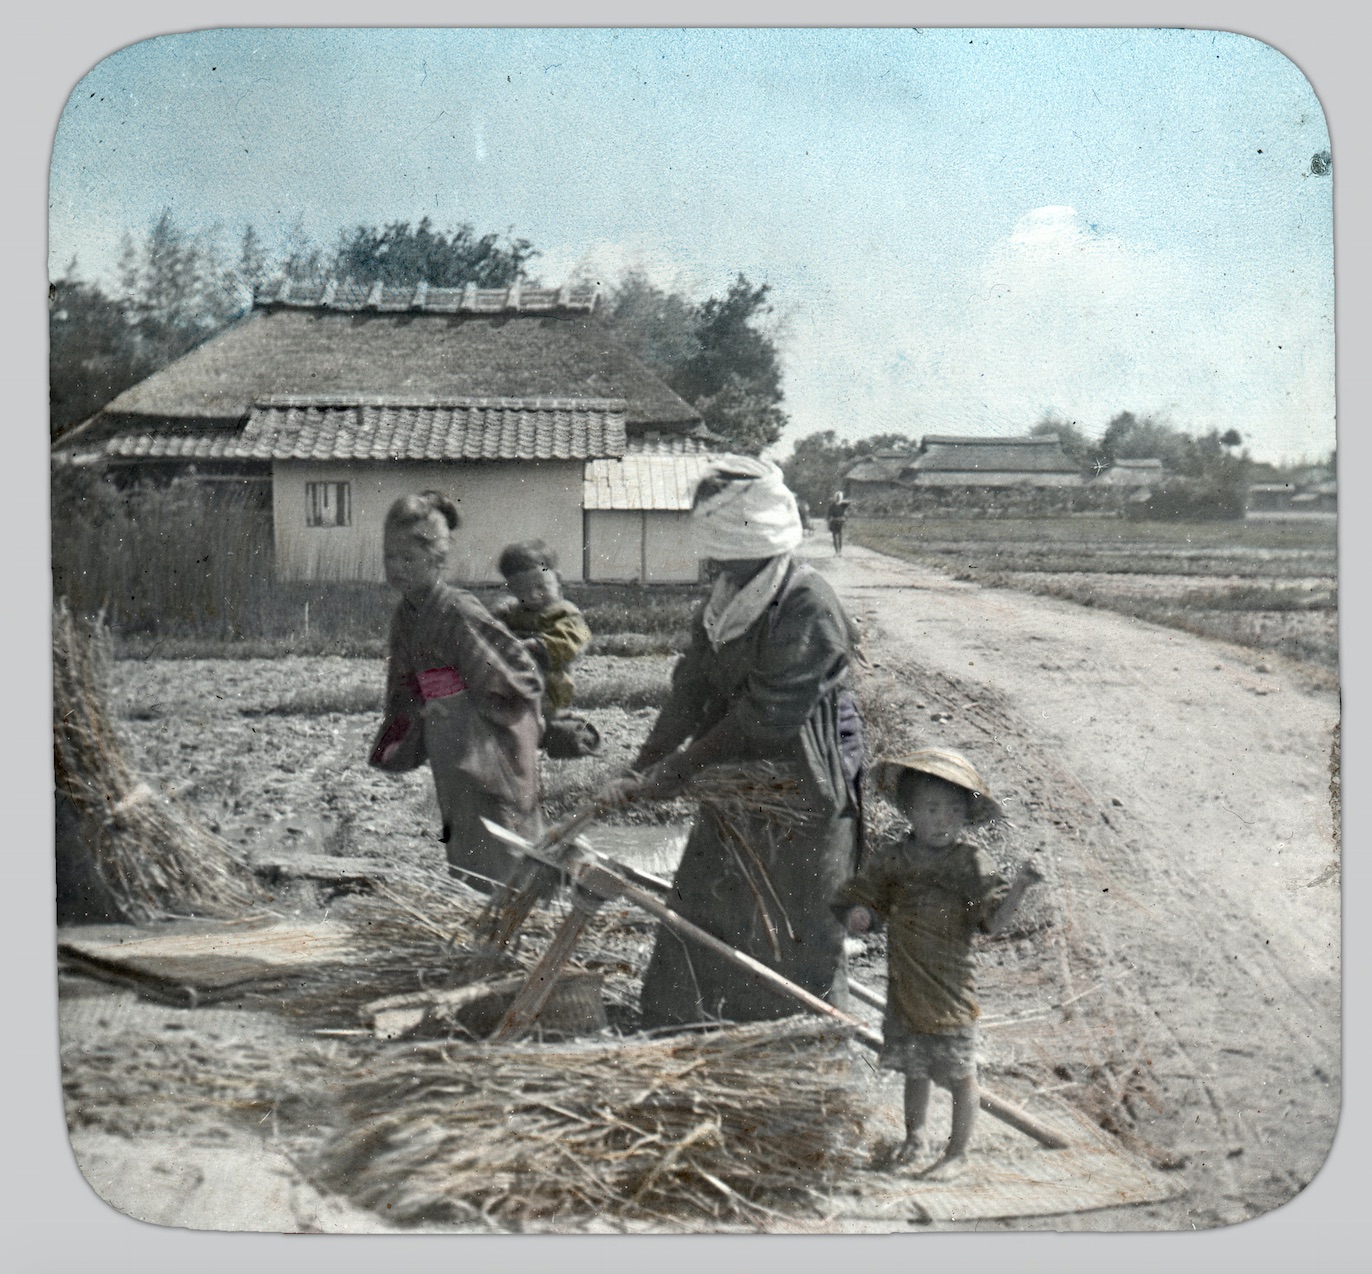 A colorized photo of two women collecting wheat. Two children also appear: one on one of the women's back and one standing next to a pile of cut wheat.